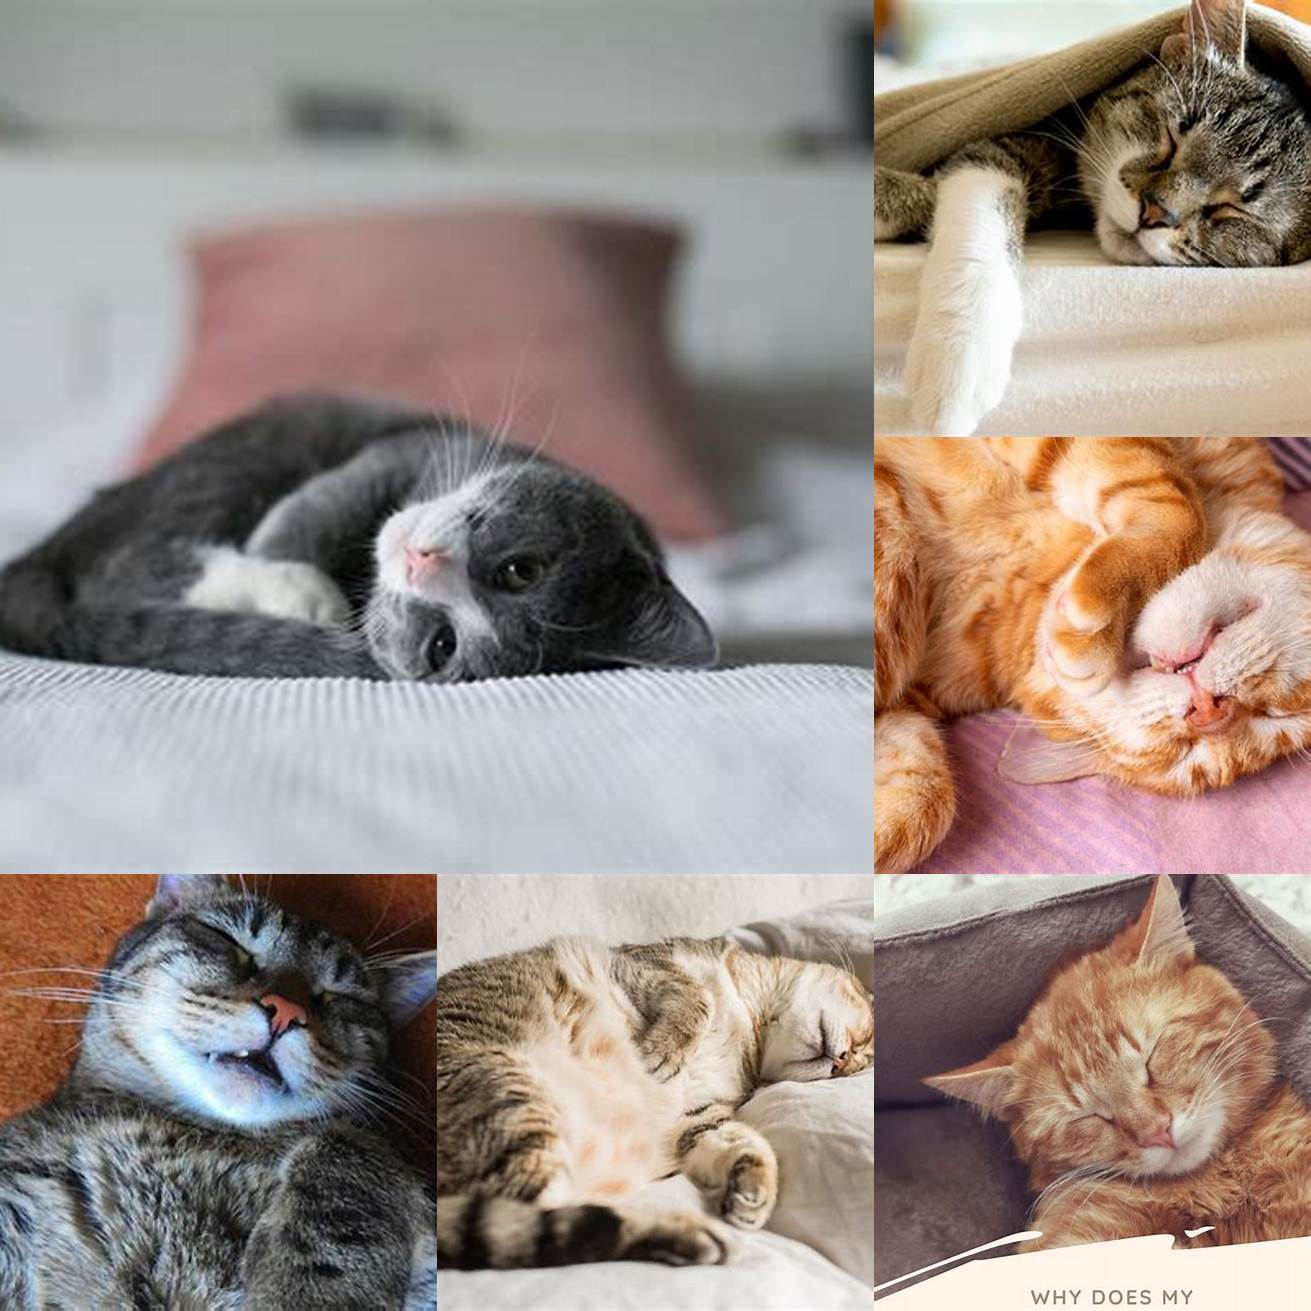 Cat snoringJust like humans some cats snore when they sleep This is usually nothing to worry about but if its excessive or accompanied by other symptoms such as coughing or wheezing its best to consult with a veterinarian to rule out any underlying health issues